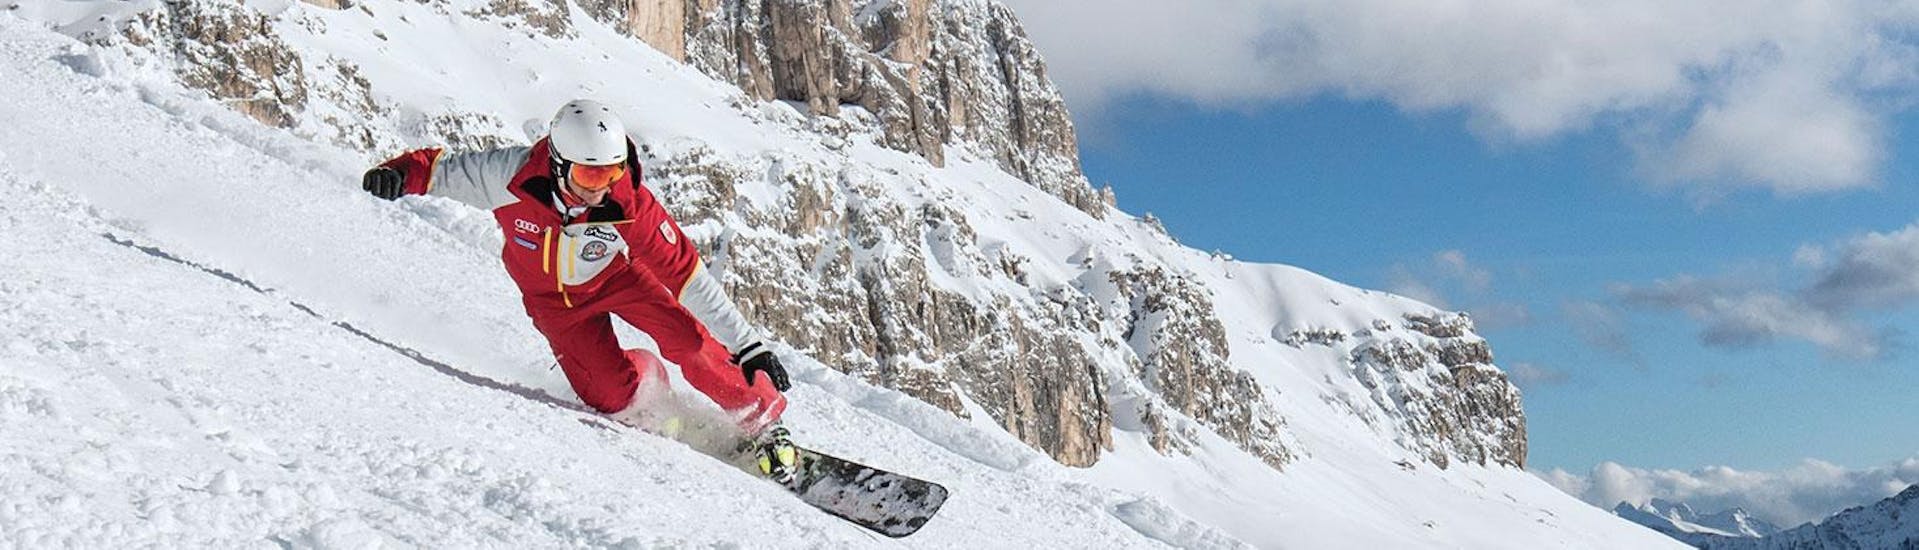 Private Snowboarding Lessons for Kids &amp; Adults for All Levels with Ski School Carezza  - Hero image